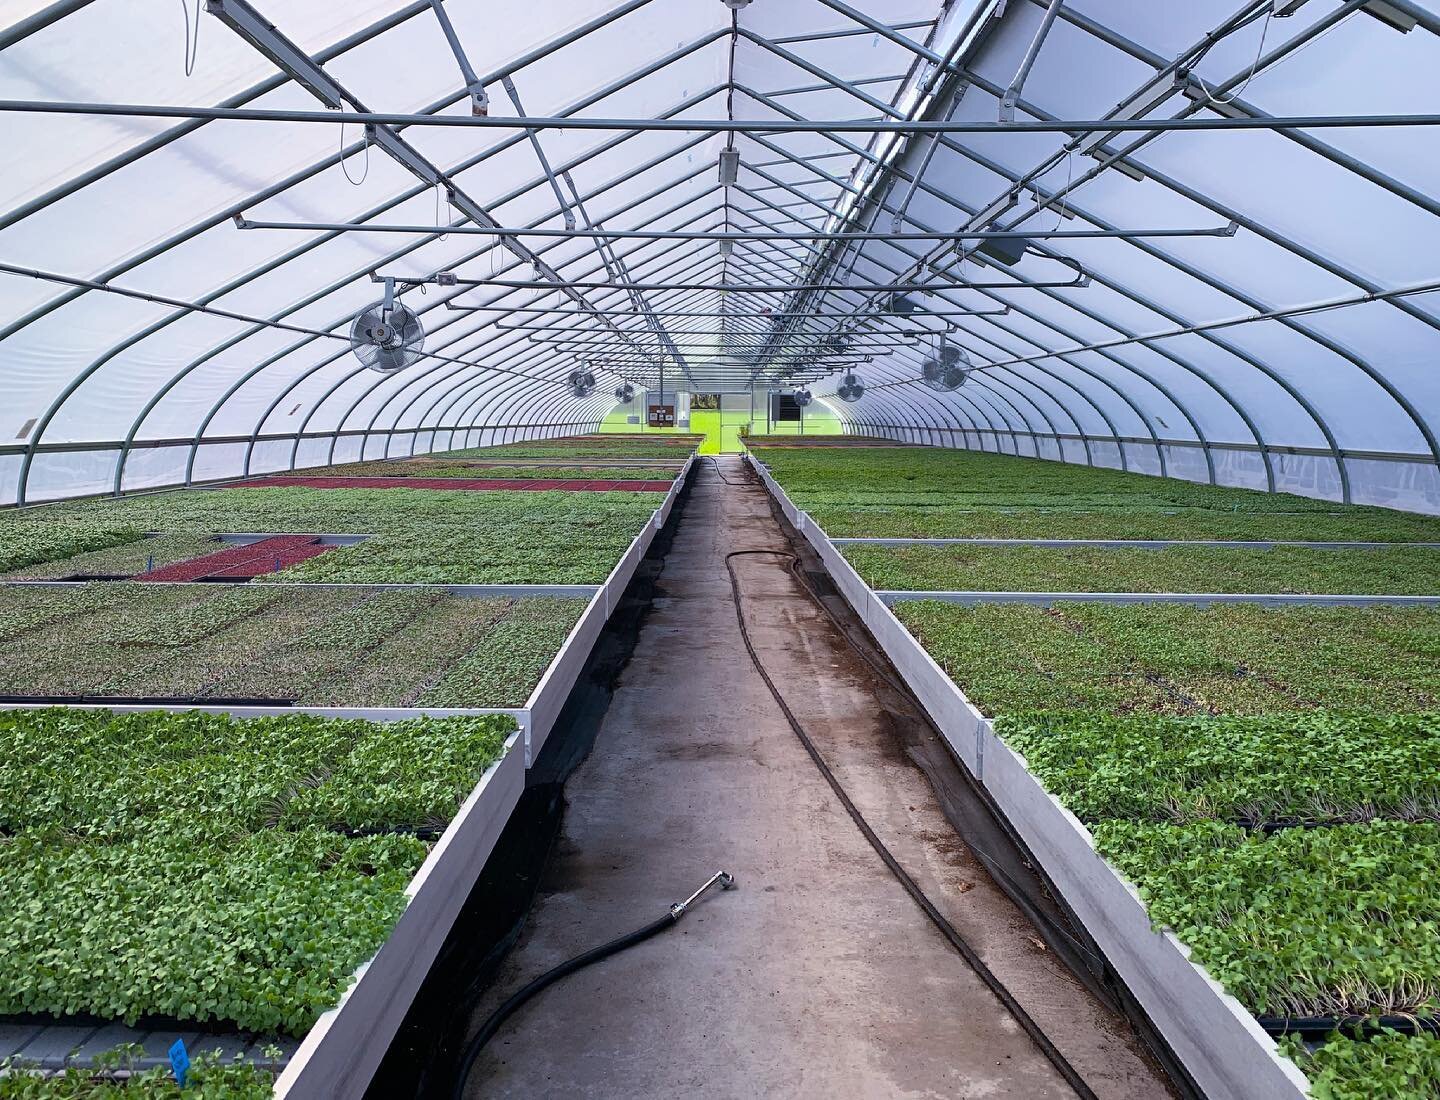 It&rsquo;s that special time of year again-the one we&rsquo;ve been waiting for all winter! The sides are up, the doors are open and the sun shades are on the greenhouses. Summer is almost here and we are absolutely loving it! 💚🌱